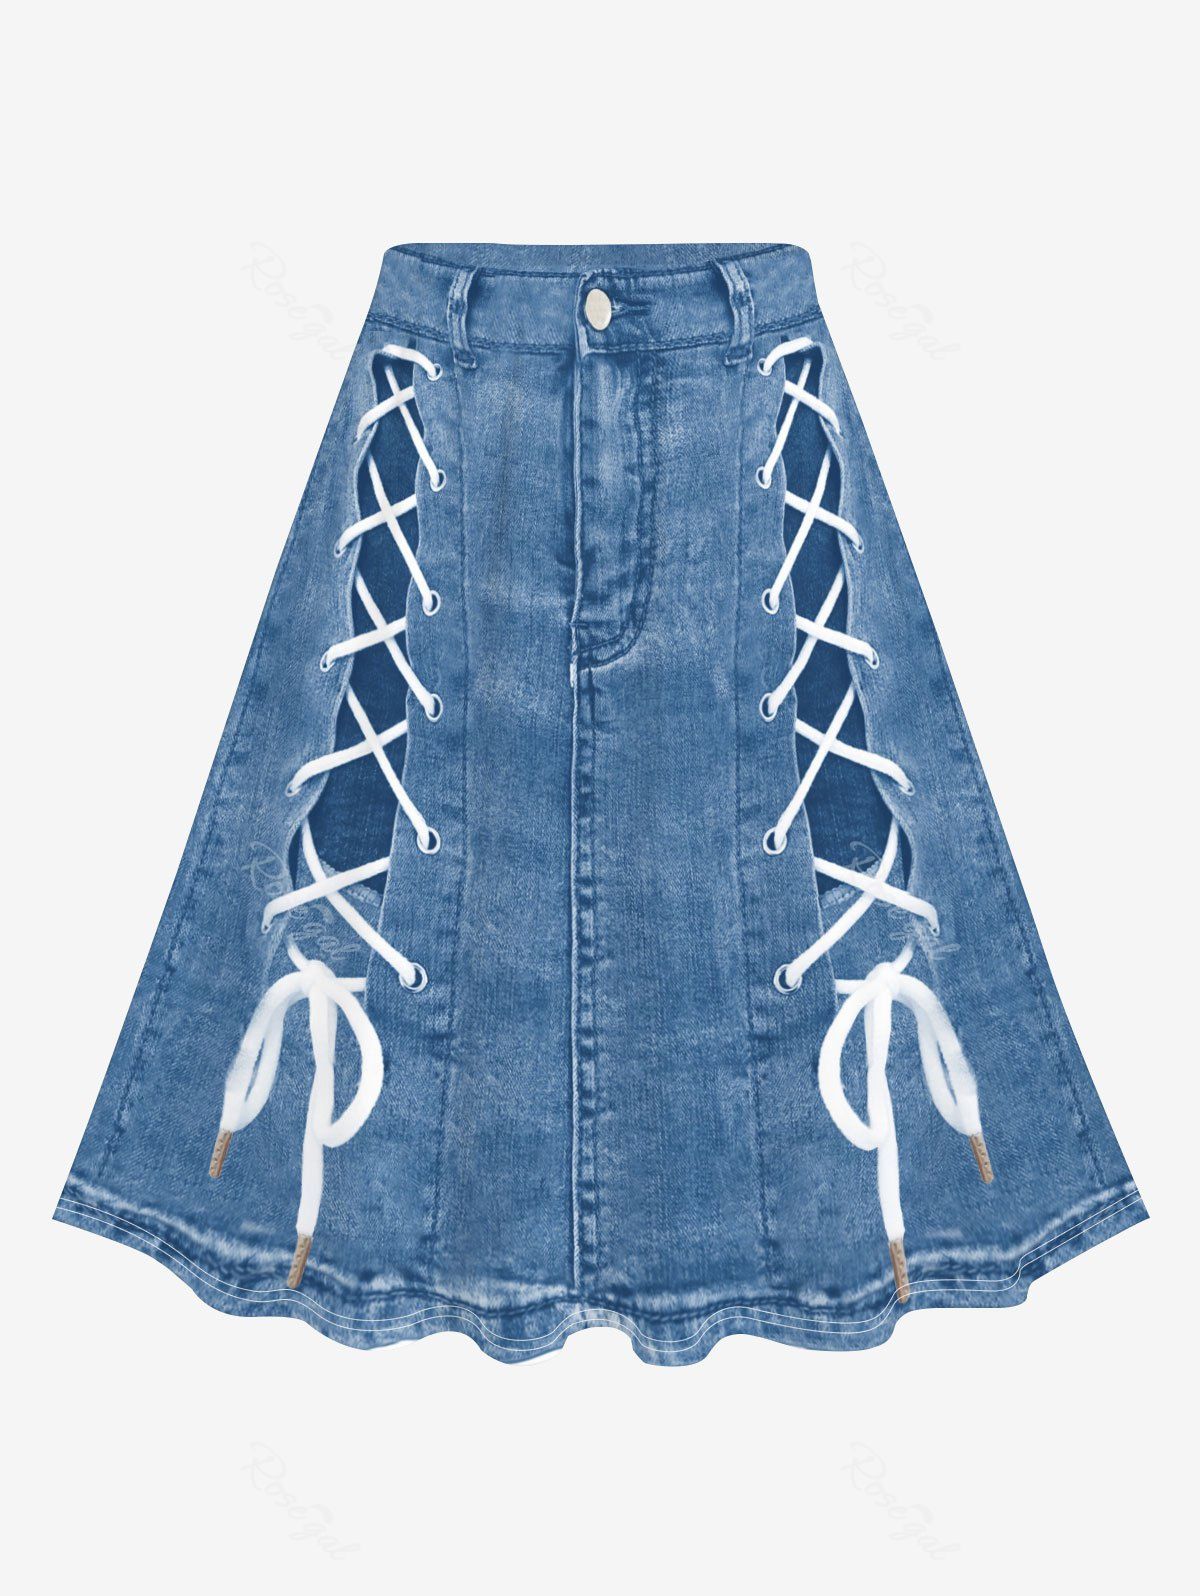 Fashion Plus Size 3D Jeans Lace Up Printed Skirt  